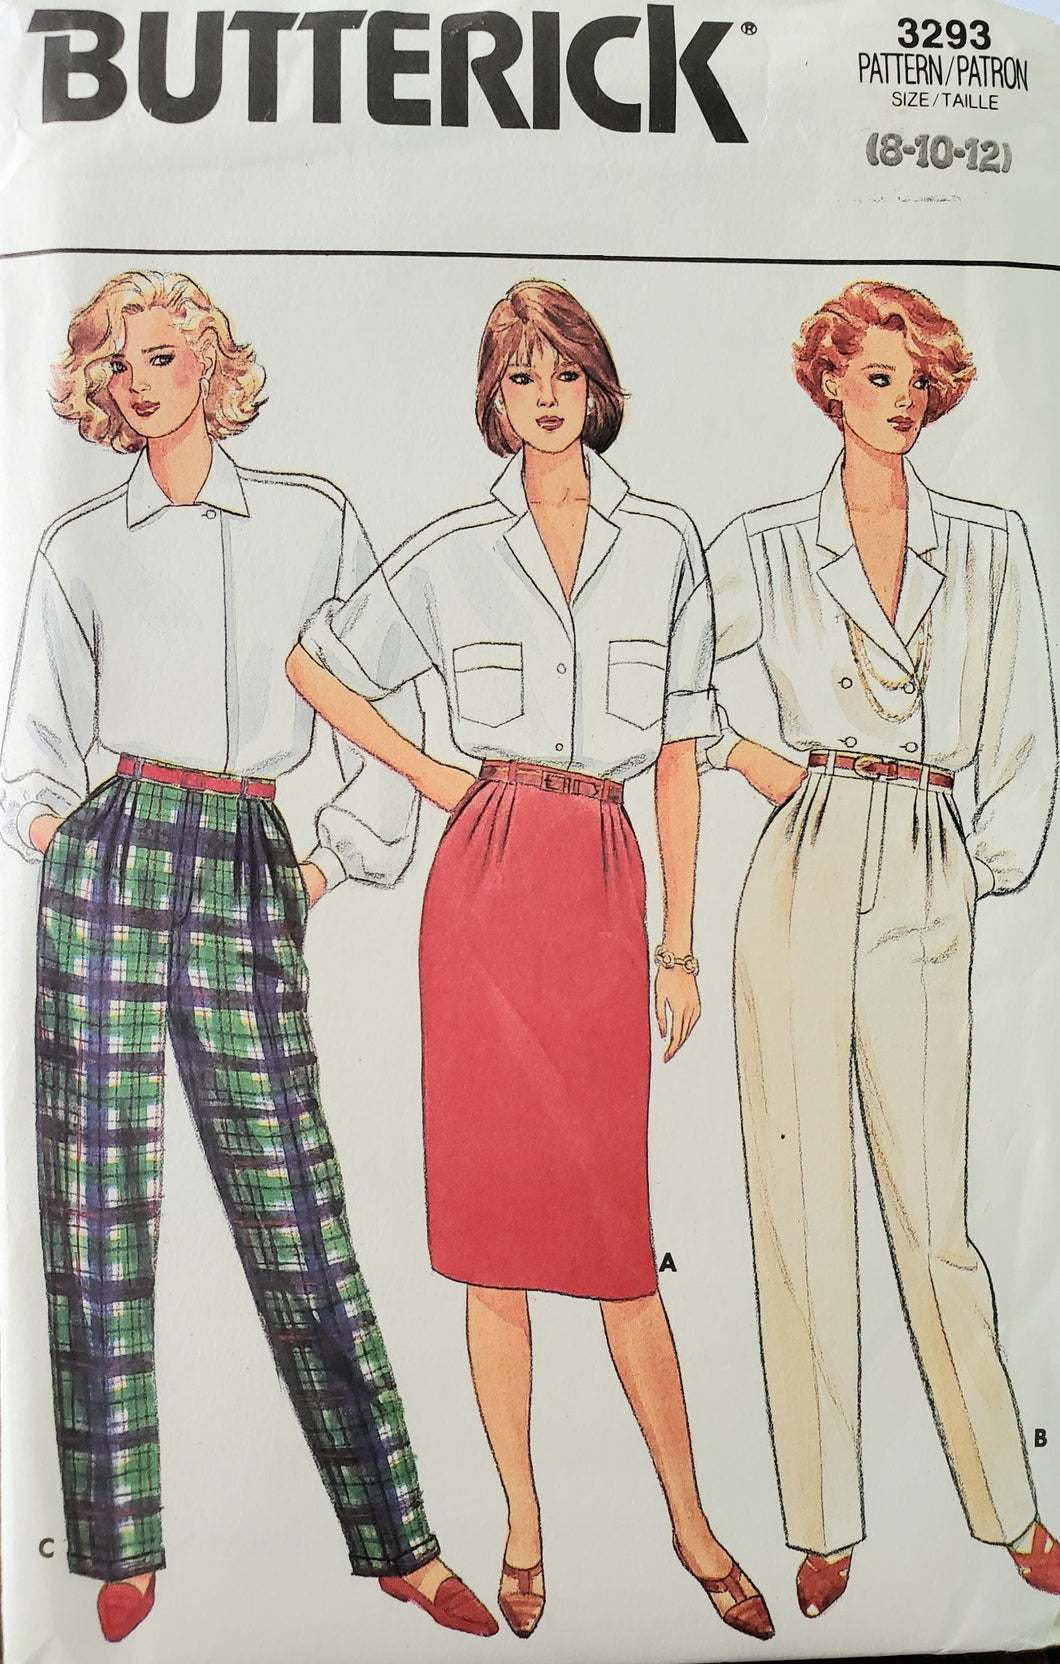 Butterick 3293 UNCUT, Misses Pleated Pants and Skirts, Sizes 8-10-12